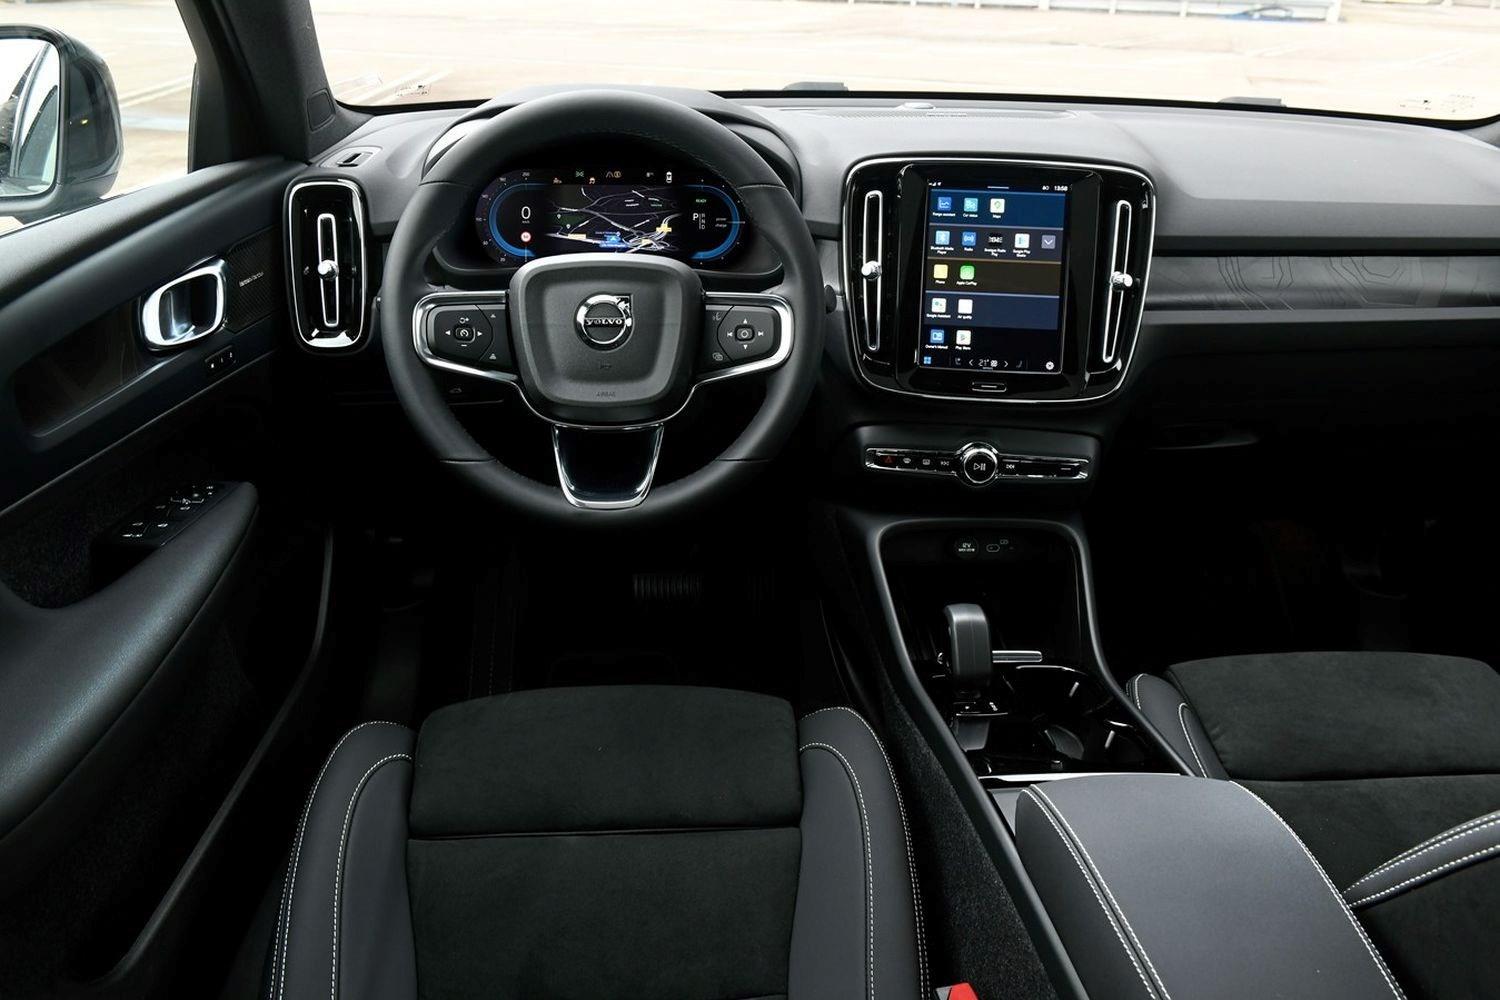 Close-up of the steering wheel and infotainment system in the Volvo C40 Recharge